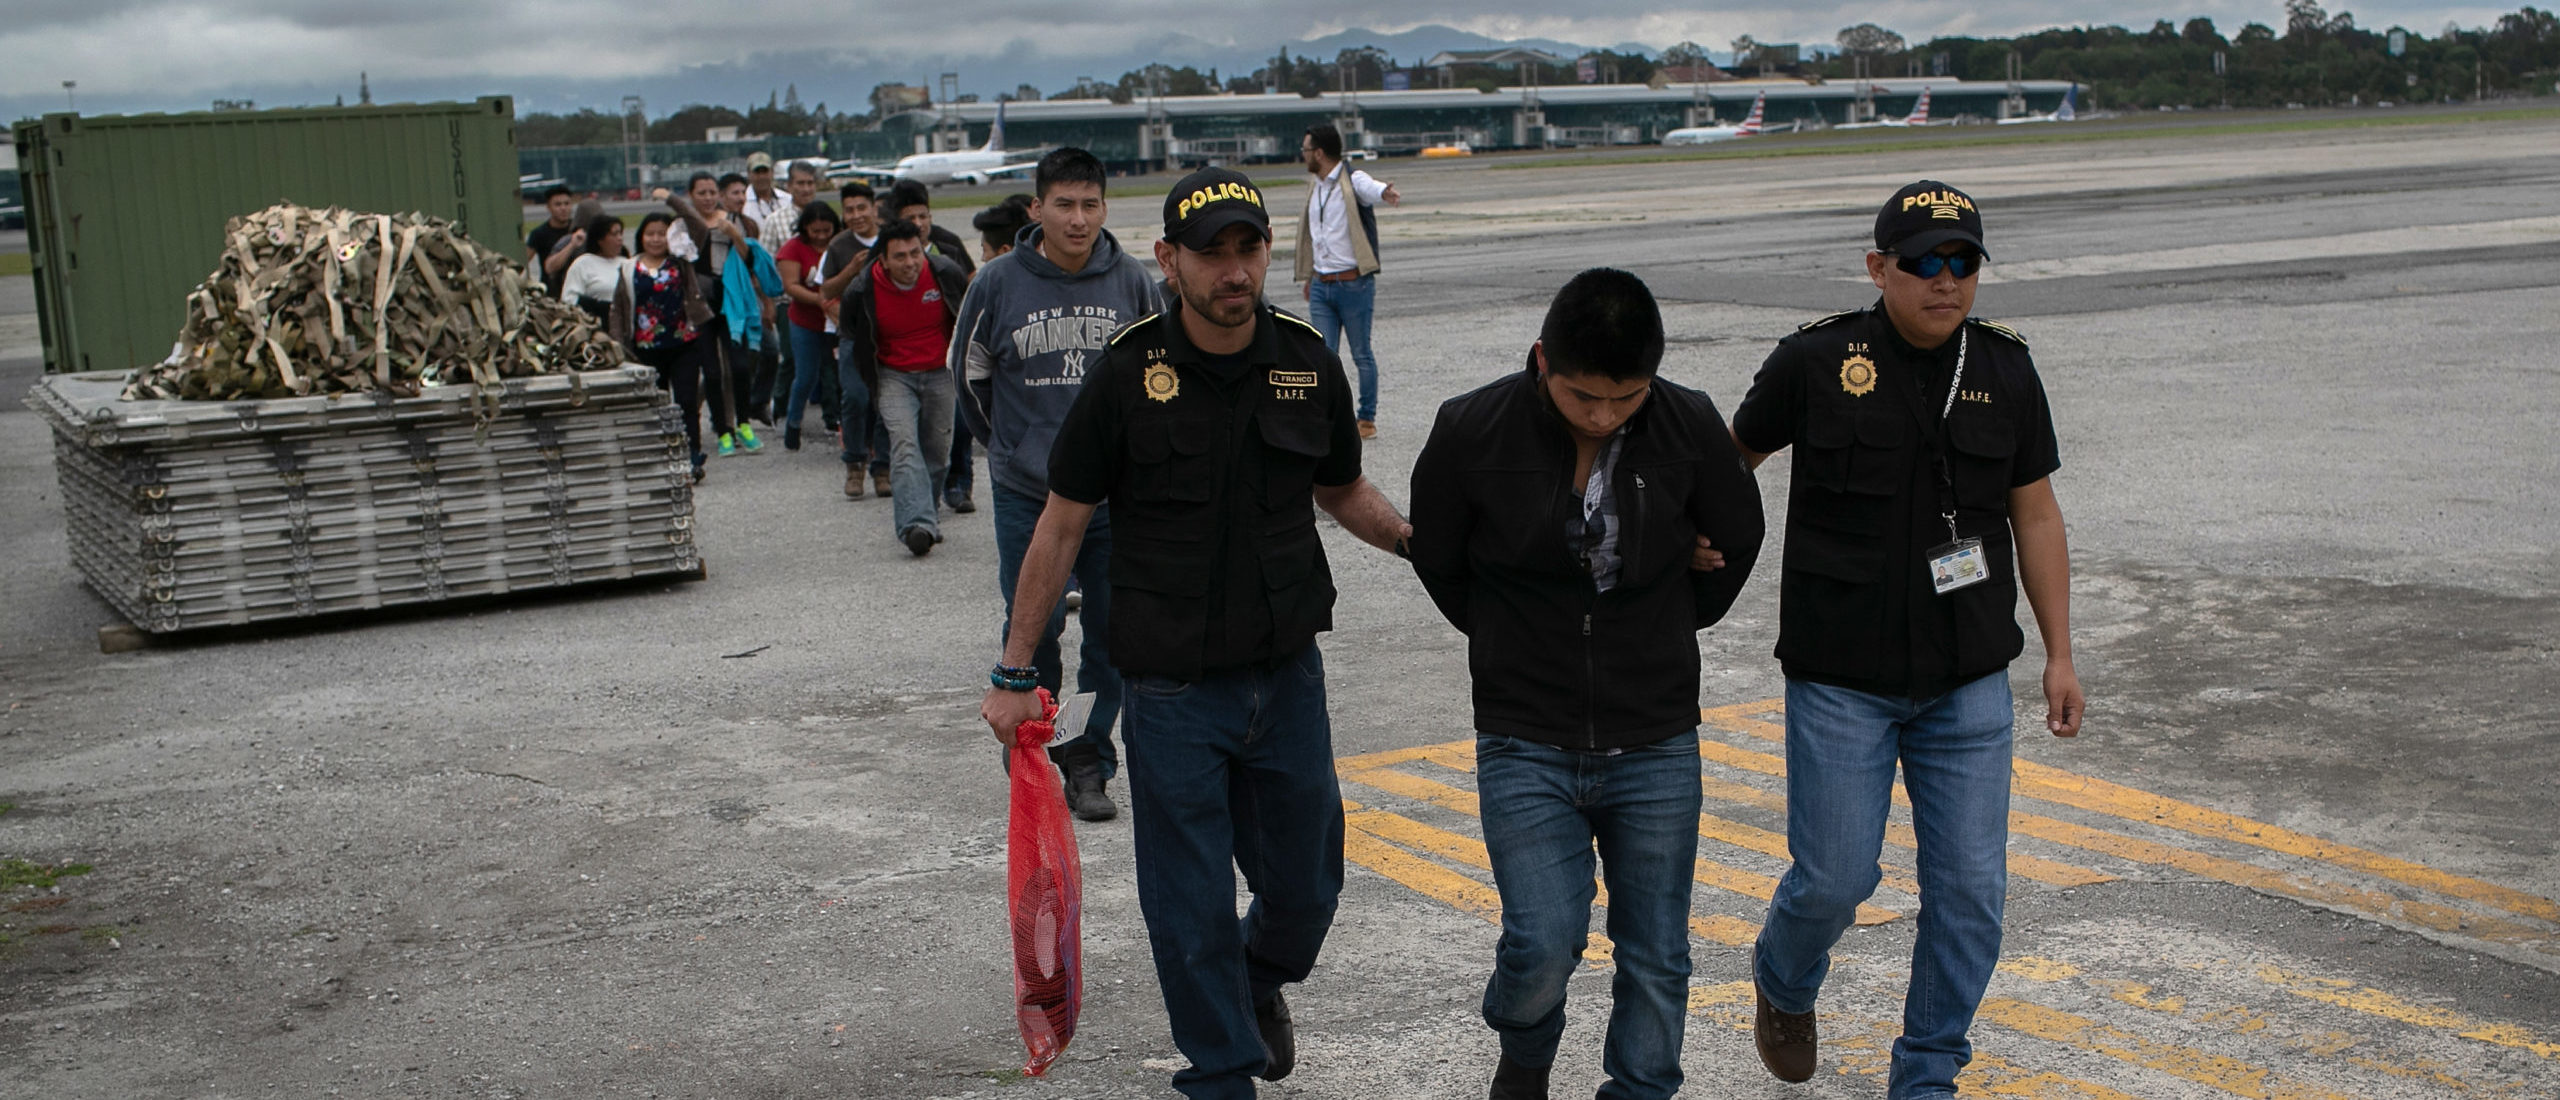 GUATEMALA CITY, GUATEMALA - MAY 30: Guatemalan police escort an accused criminal on the airport tarmac after he and other Guatemalans were deported from the United States on May 30, 2019 in Guatemala City, Guatemala. U.S. Immigration and Customs Enforcement (ICE) charters airplanes to deport some 2,000 people per week to Guatemala from various U.S. cities. (Photo by John Moore/Getty Images)